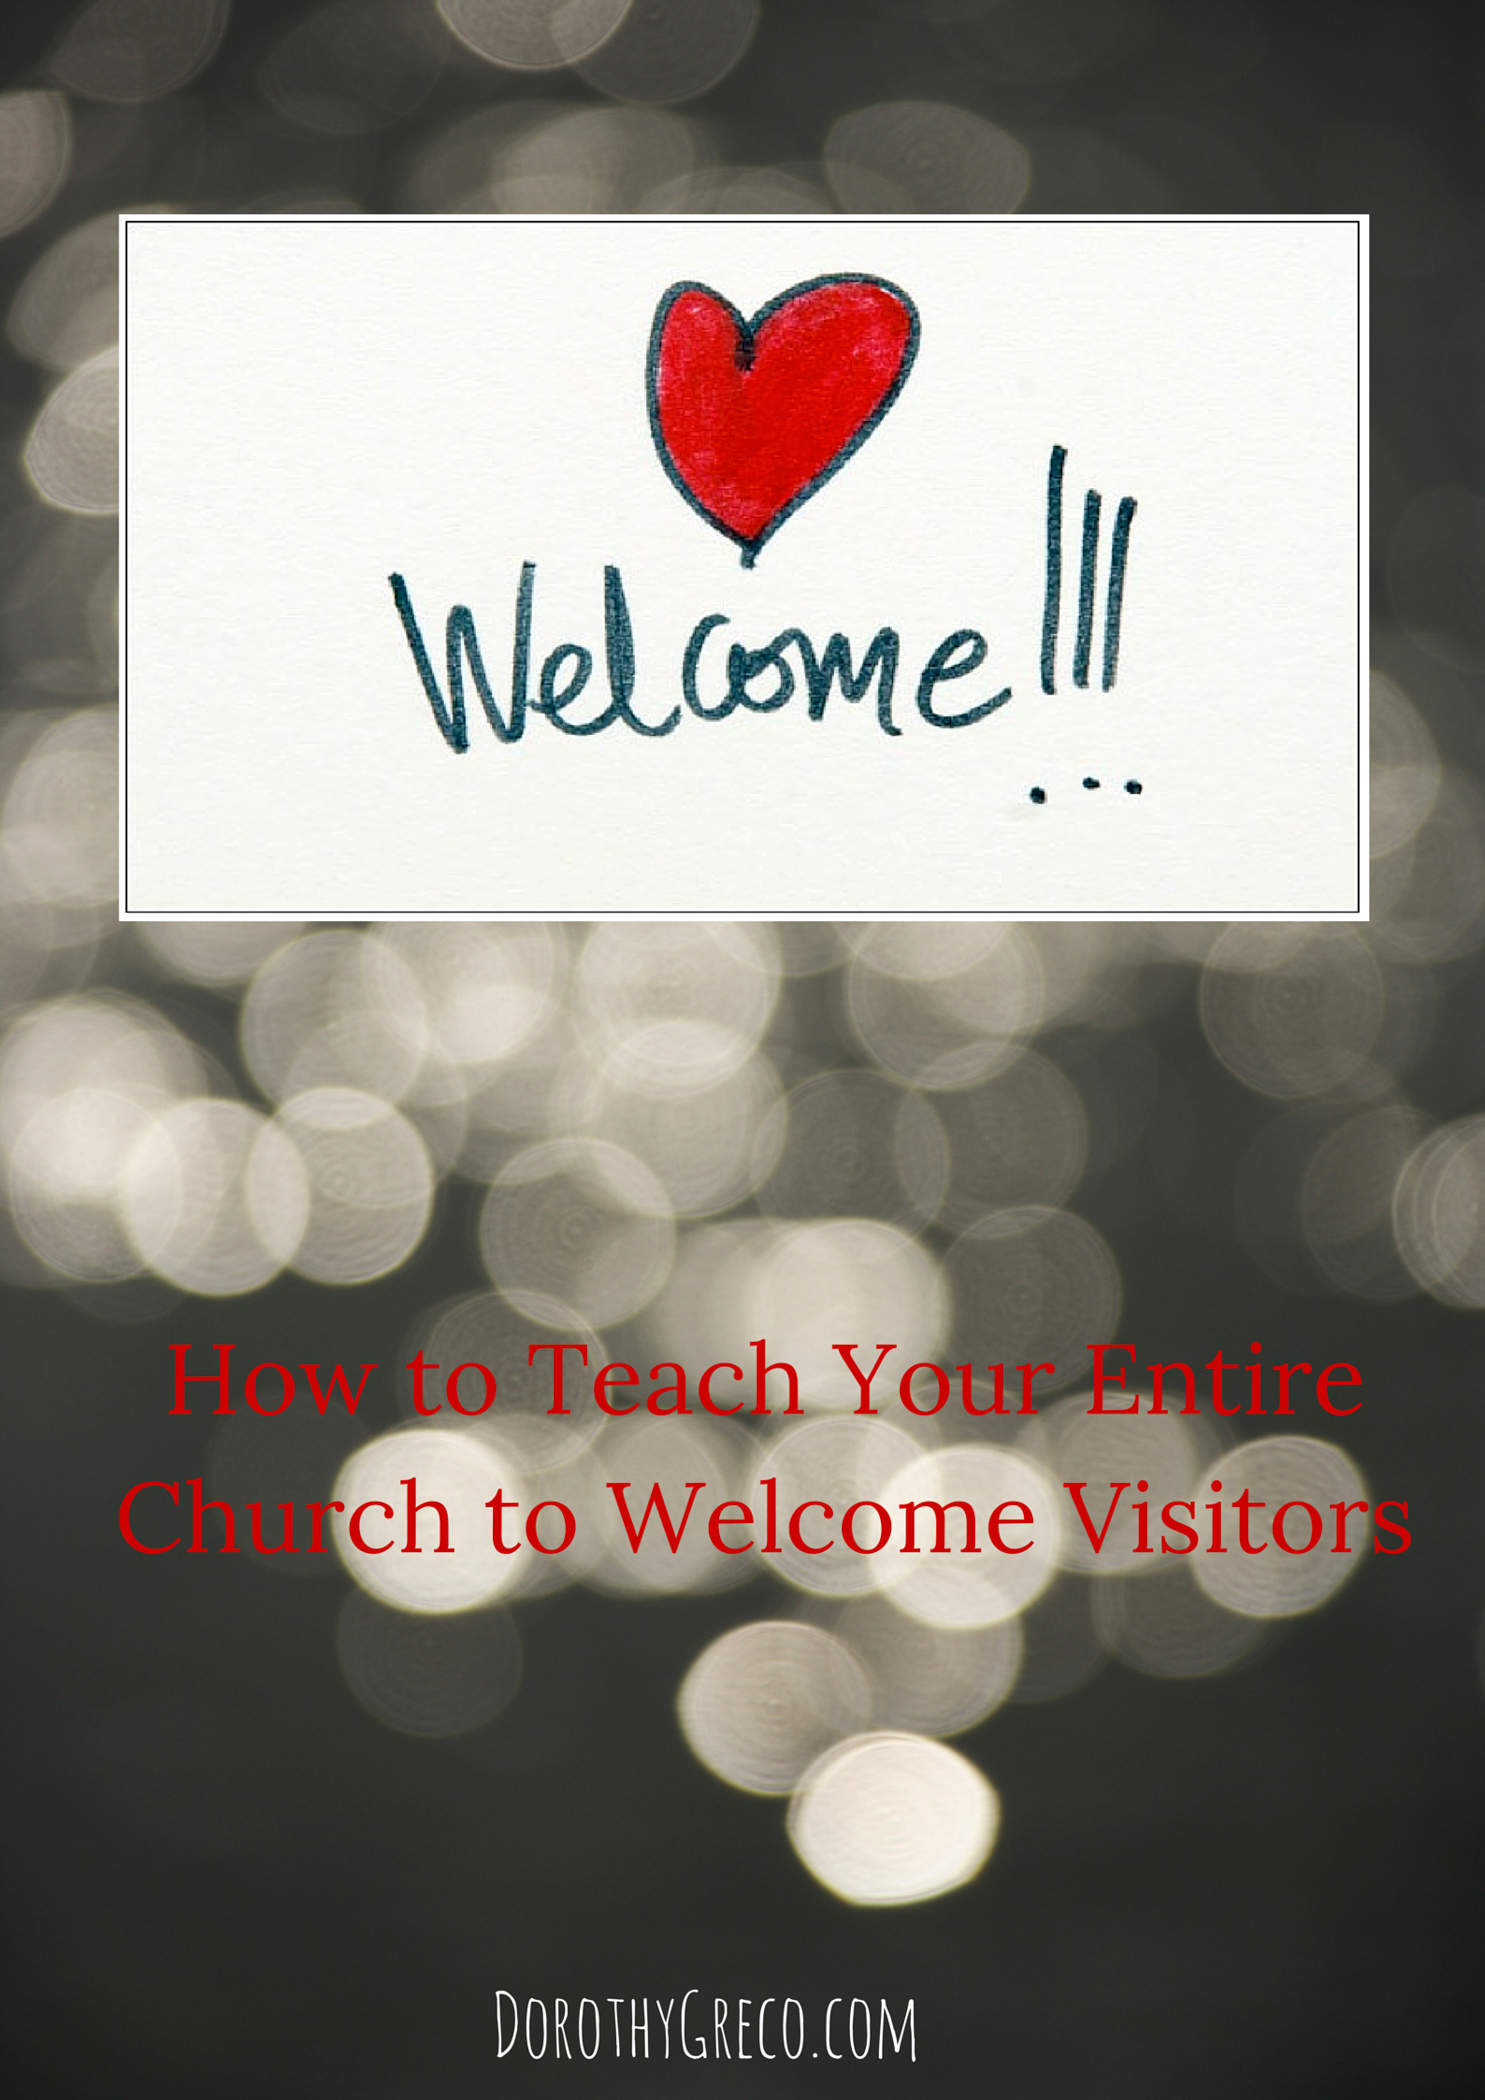 How to Teach Your Church to Welcome Visitors